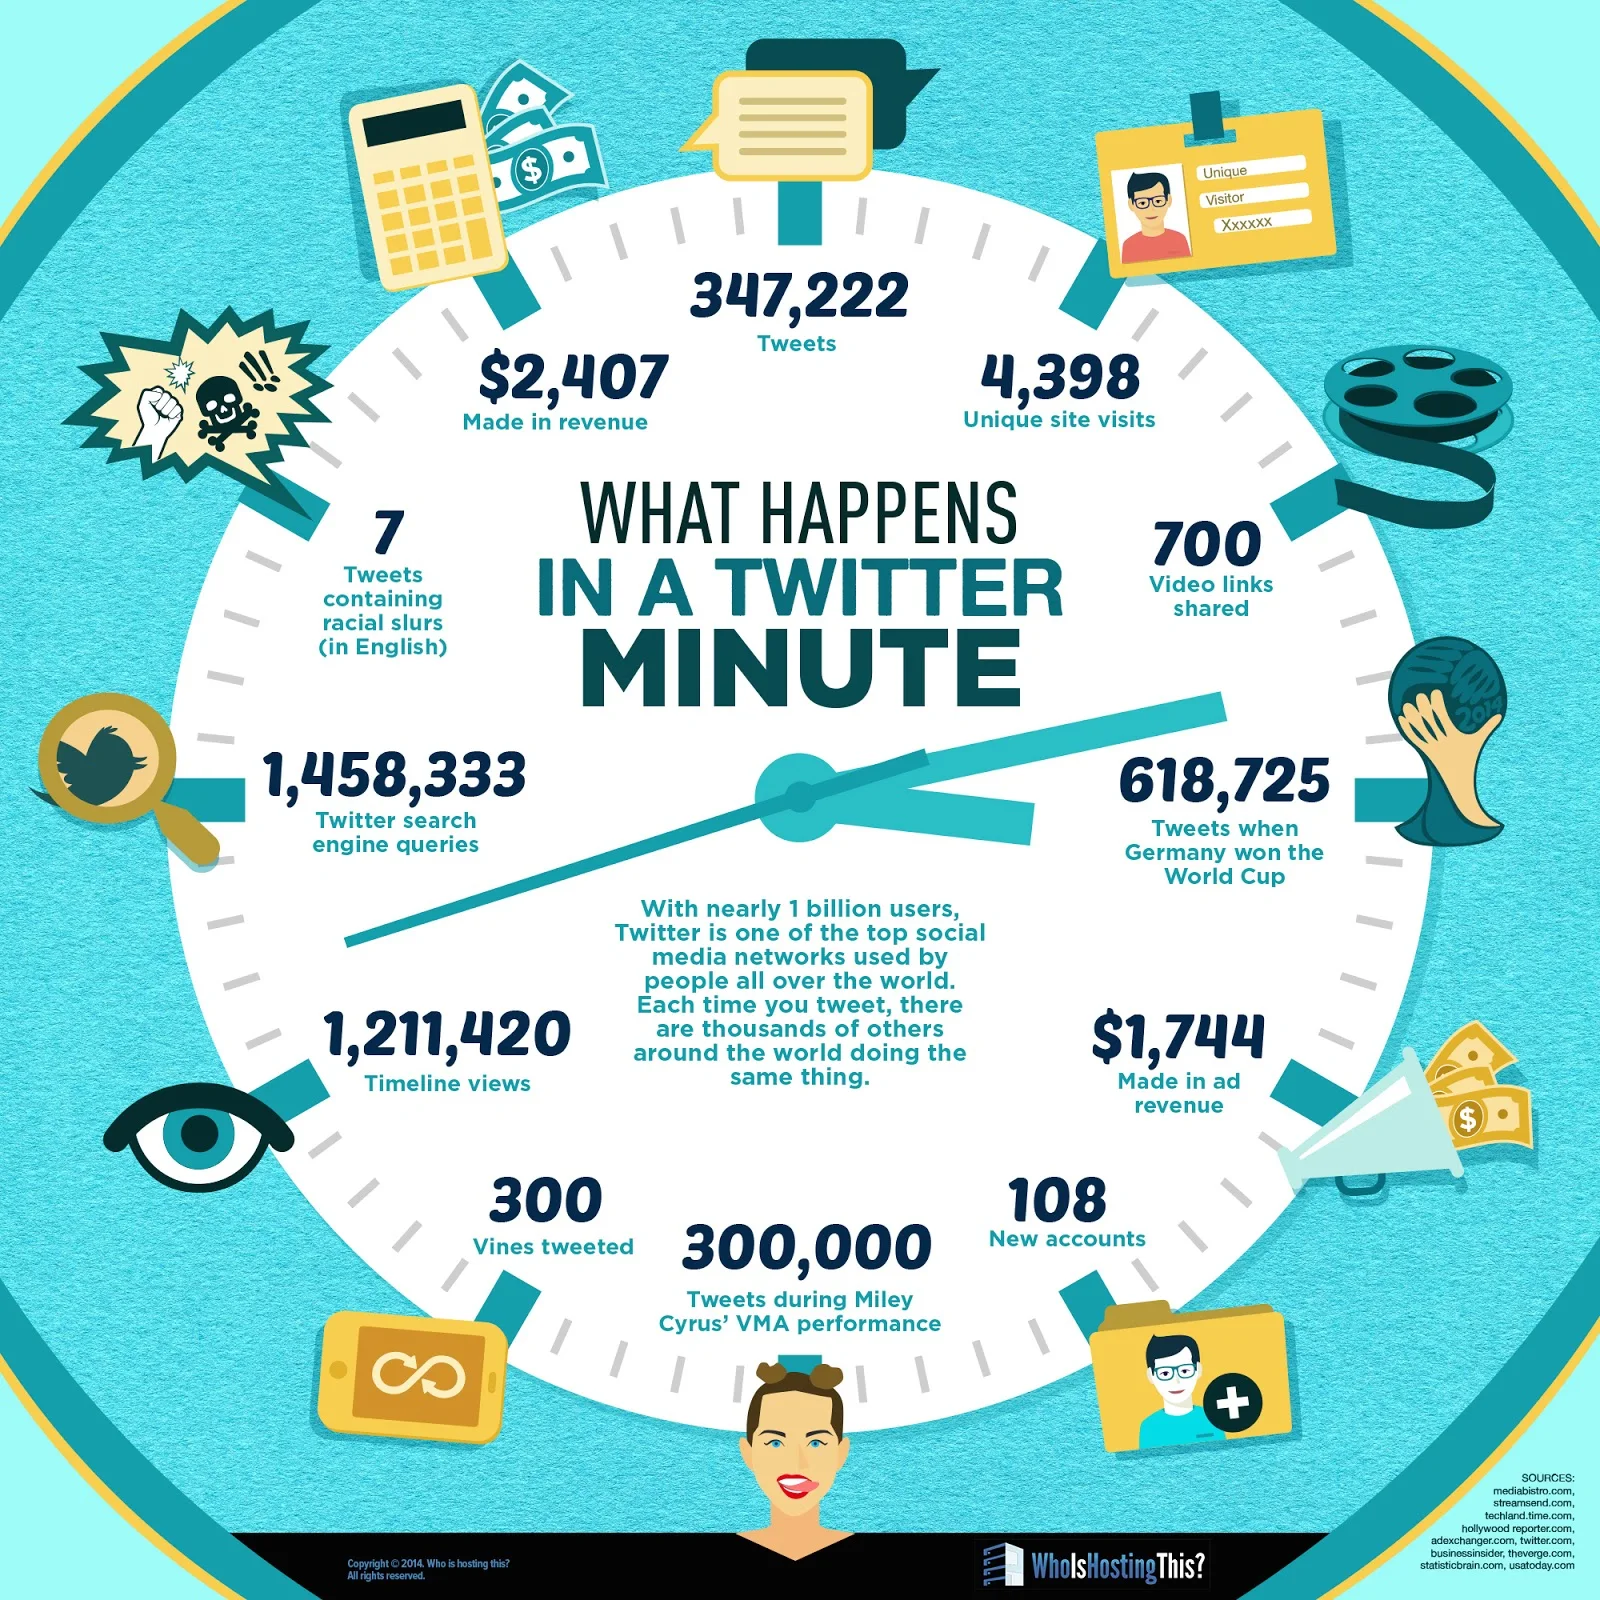 Some increadible facts and stats on What Happens in Just ONE Minute on Twitter - #infographic #socialmedia